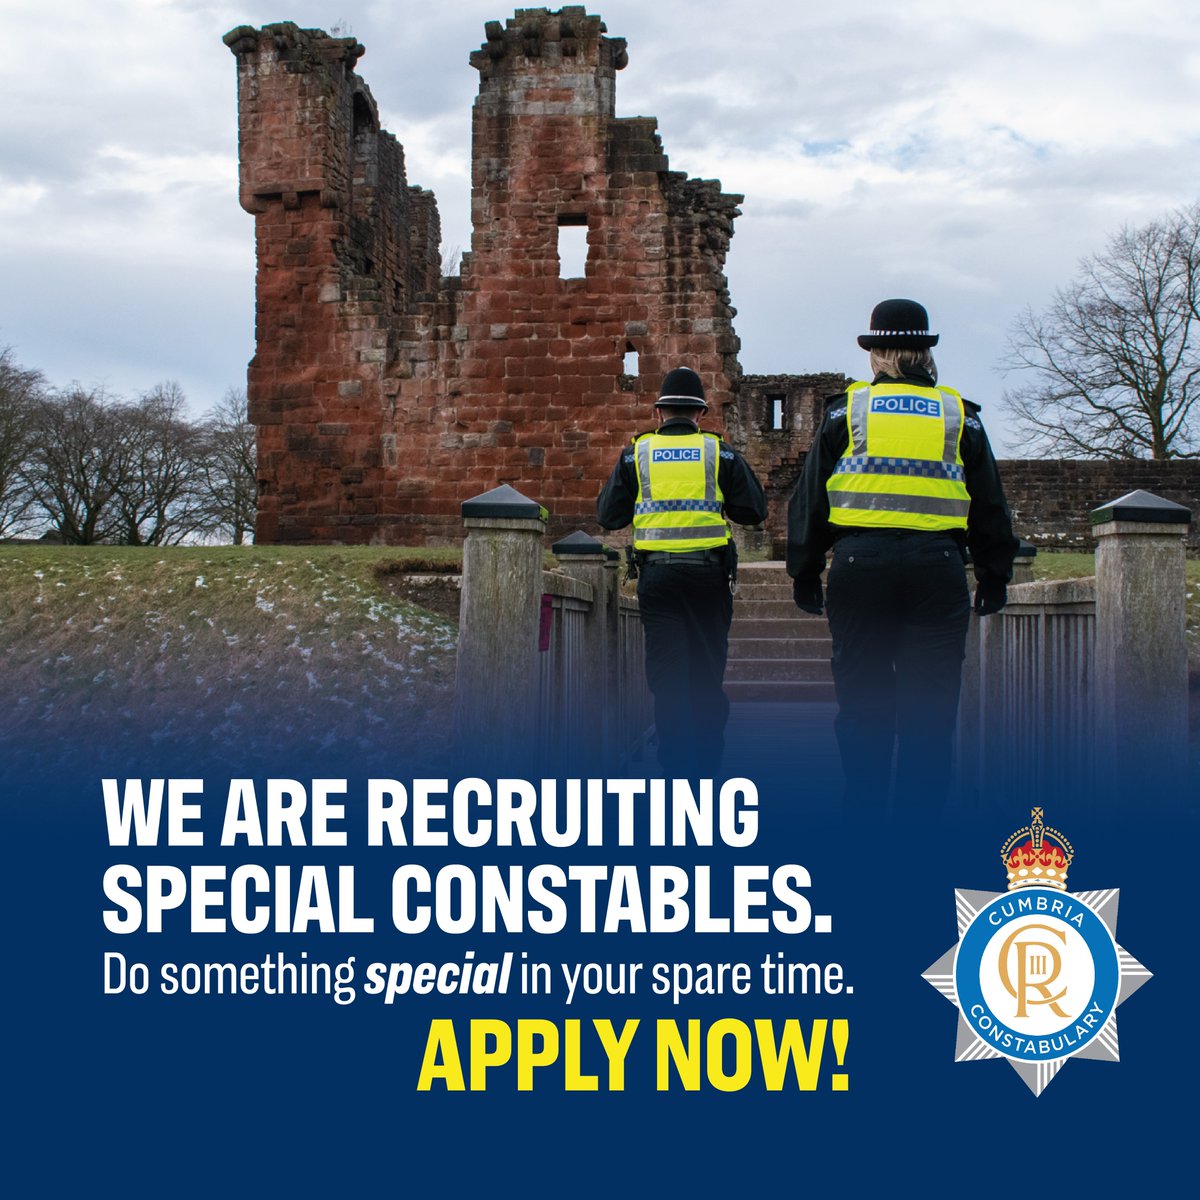 Do you want to do something special in your spare time? We are accepting applications for Special Constables in Barrow - join us in #KeepingCumbriaSafe 👮 Are you interested and want to find out more? Visit orlo.uk/jxxOb